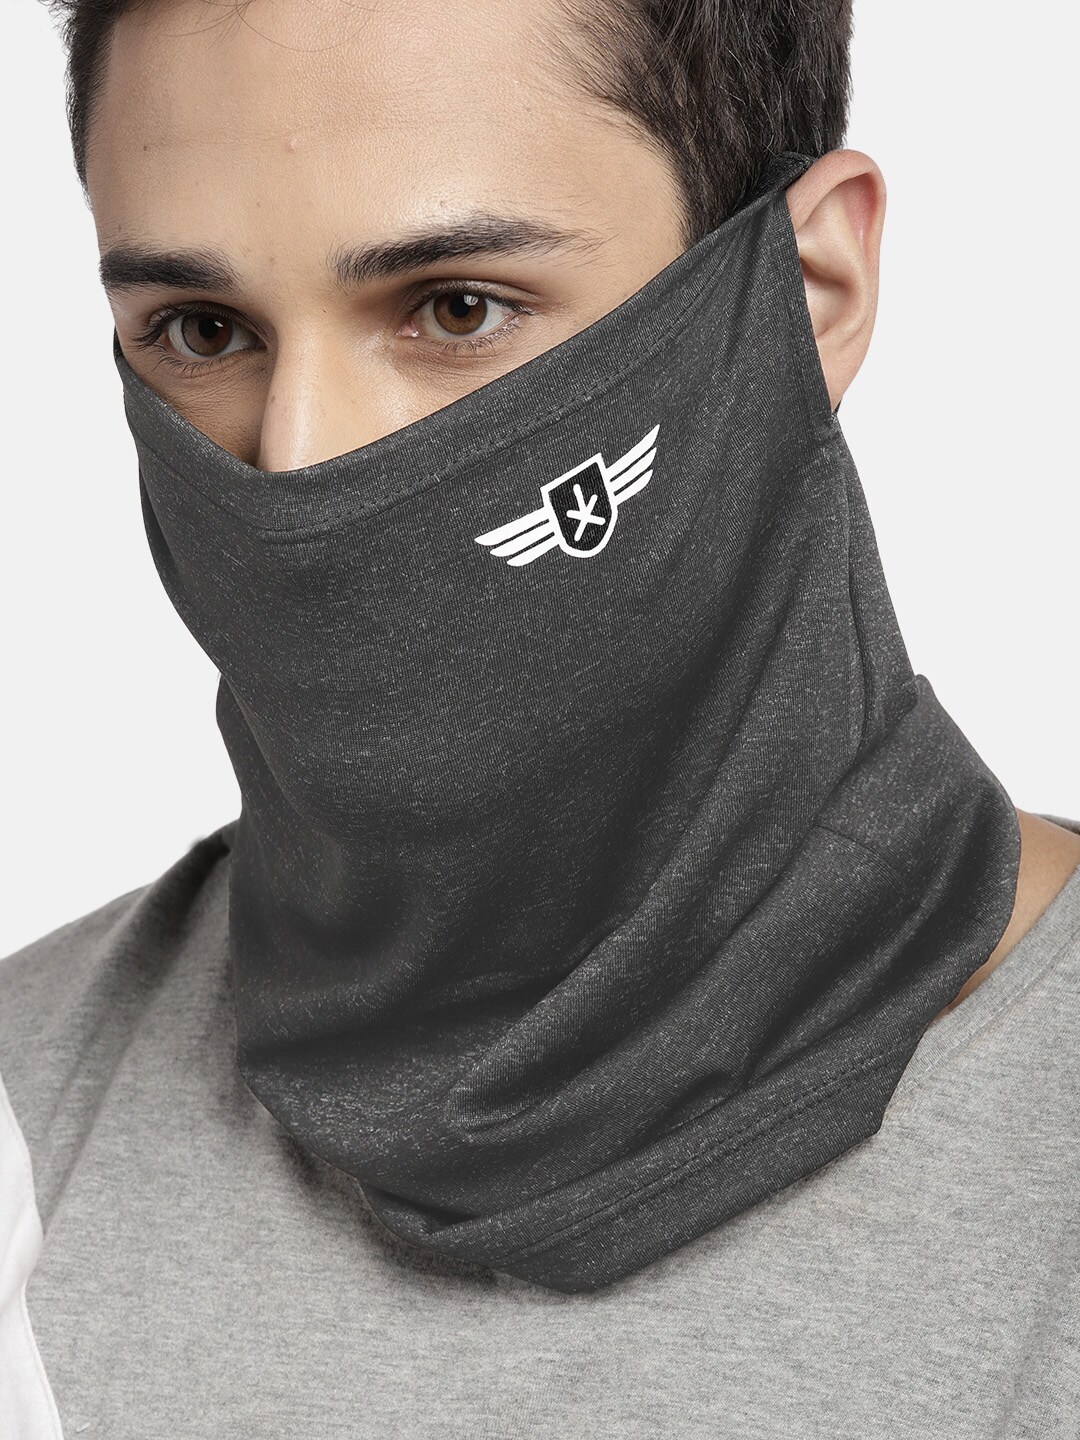 Roadster Unisex Black Solid 1-Ply Reusable Outdoor Cloth Scarf Mask Price in India